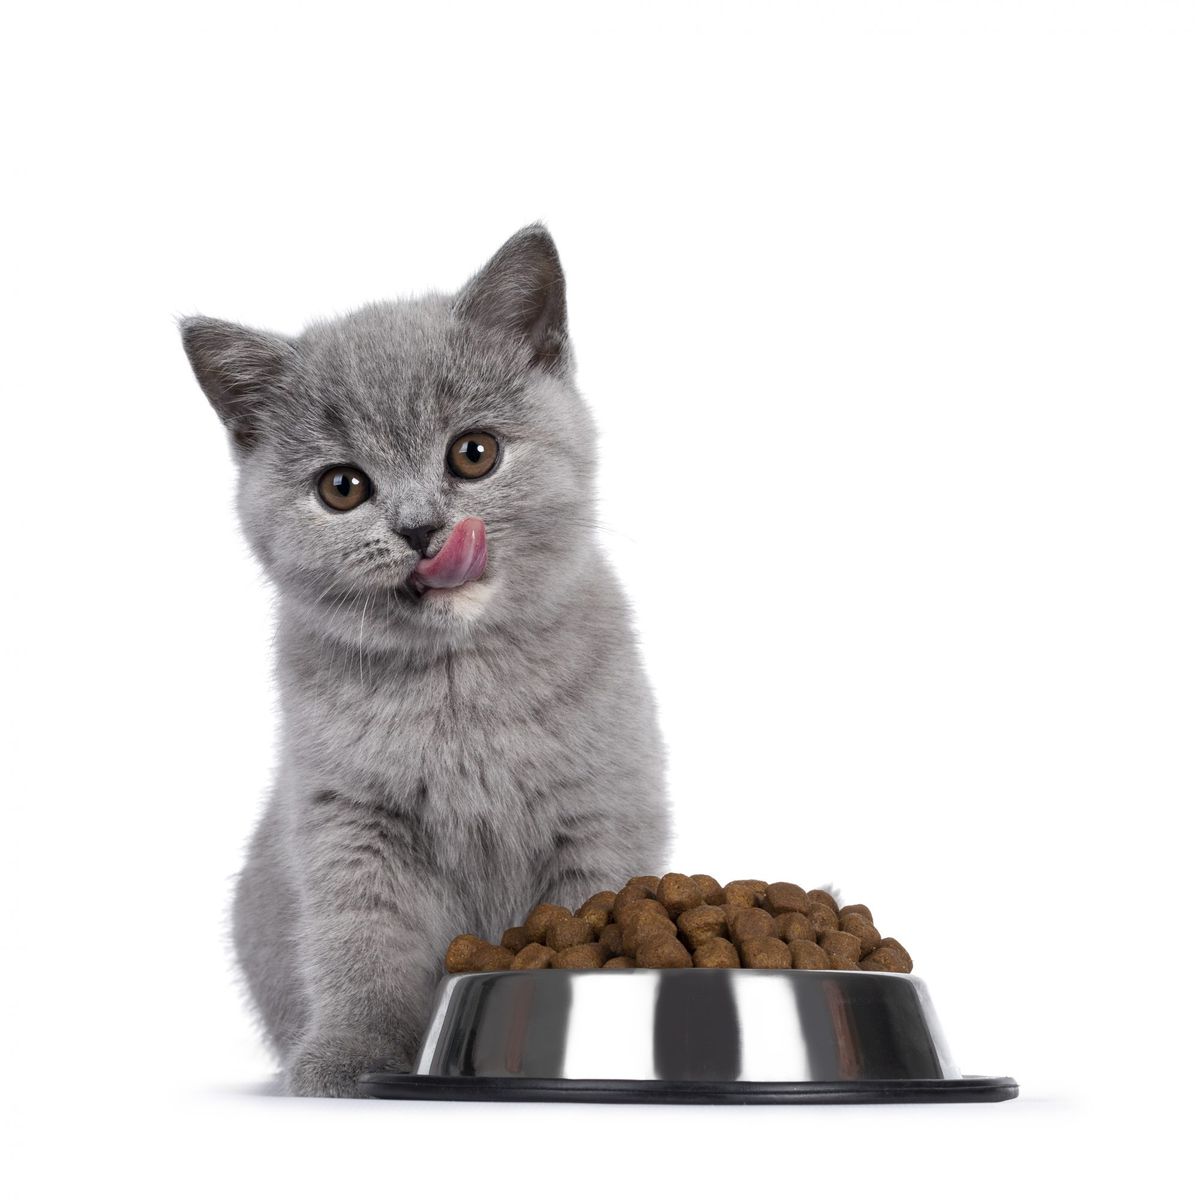 Choosing the Best Food for Your Kitten